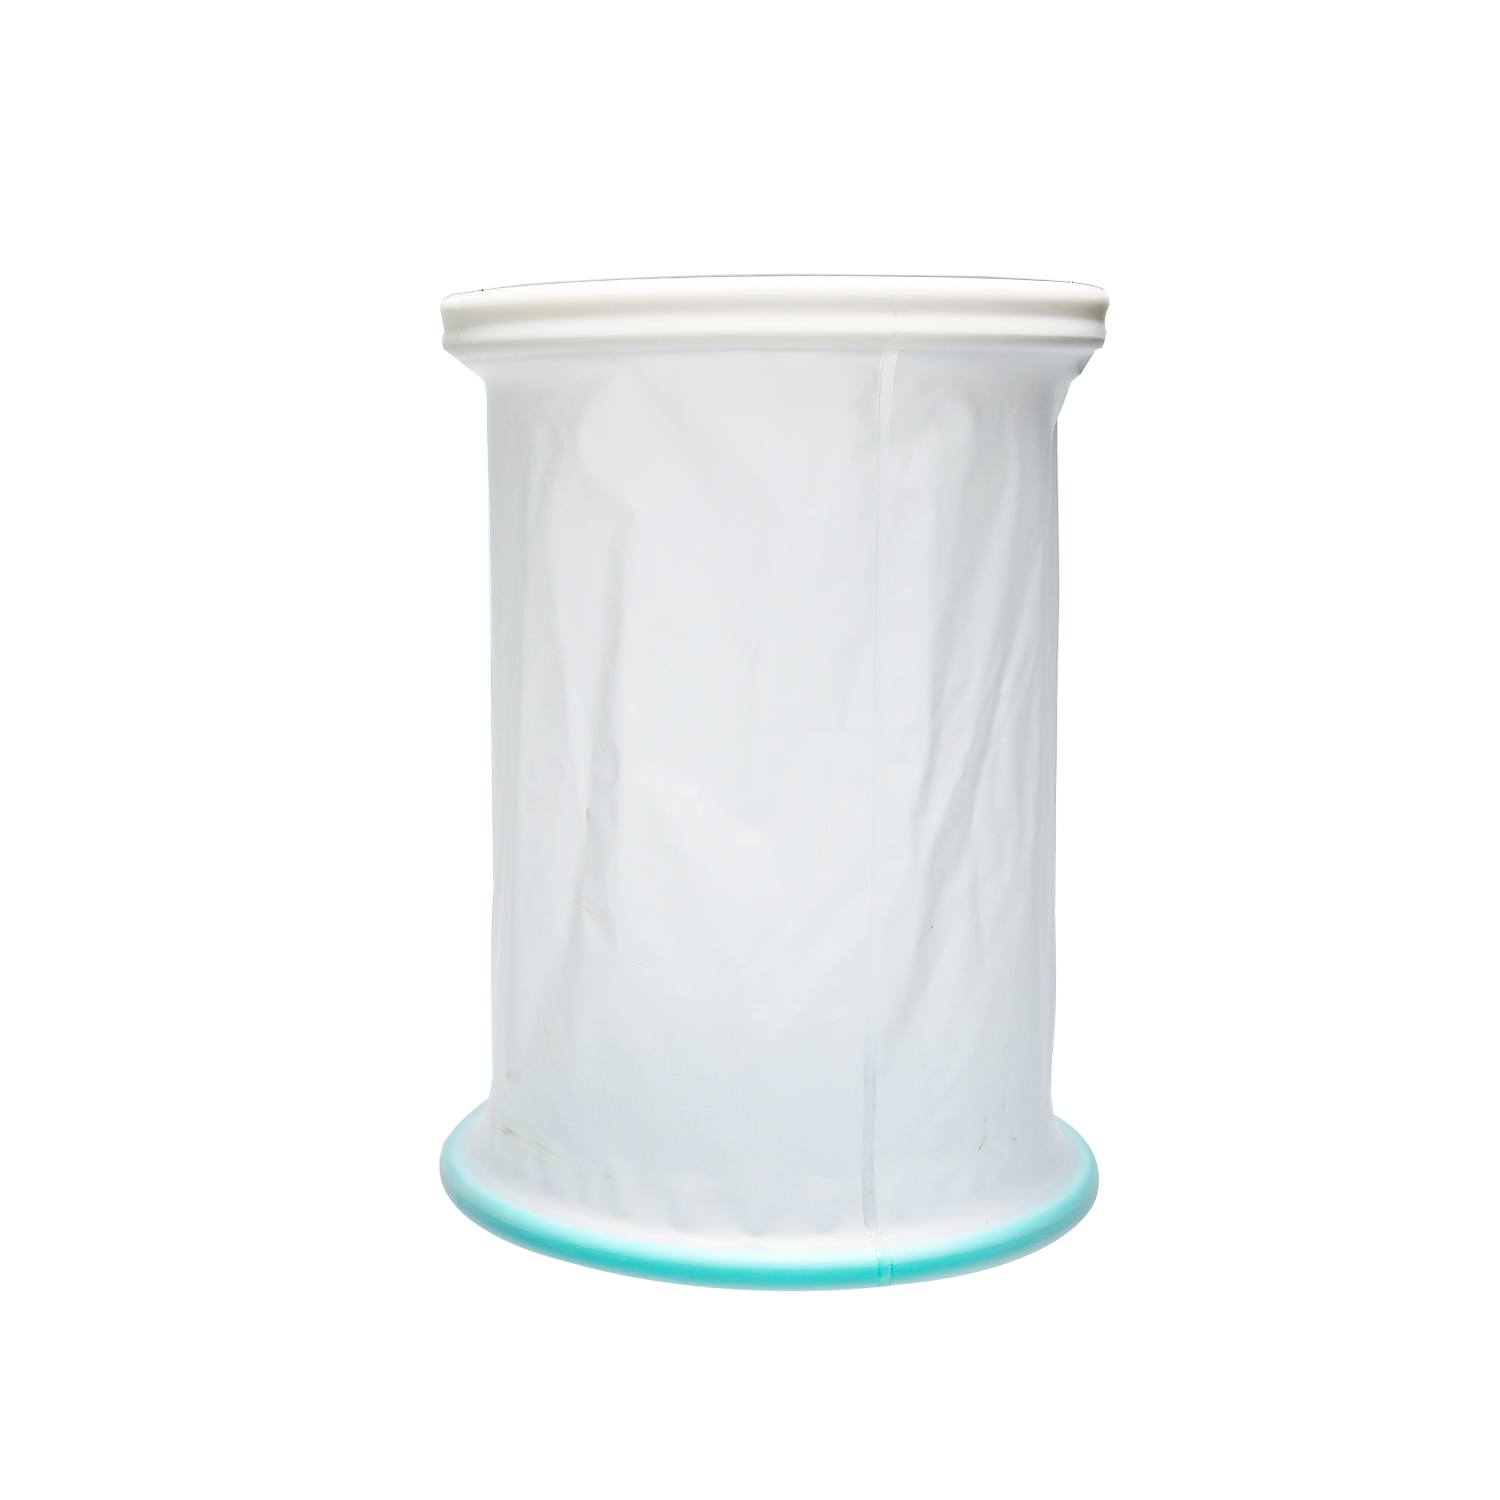 Disposable Sterile Non-toxic Incision Sleeve